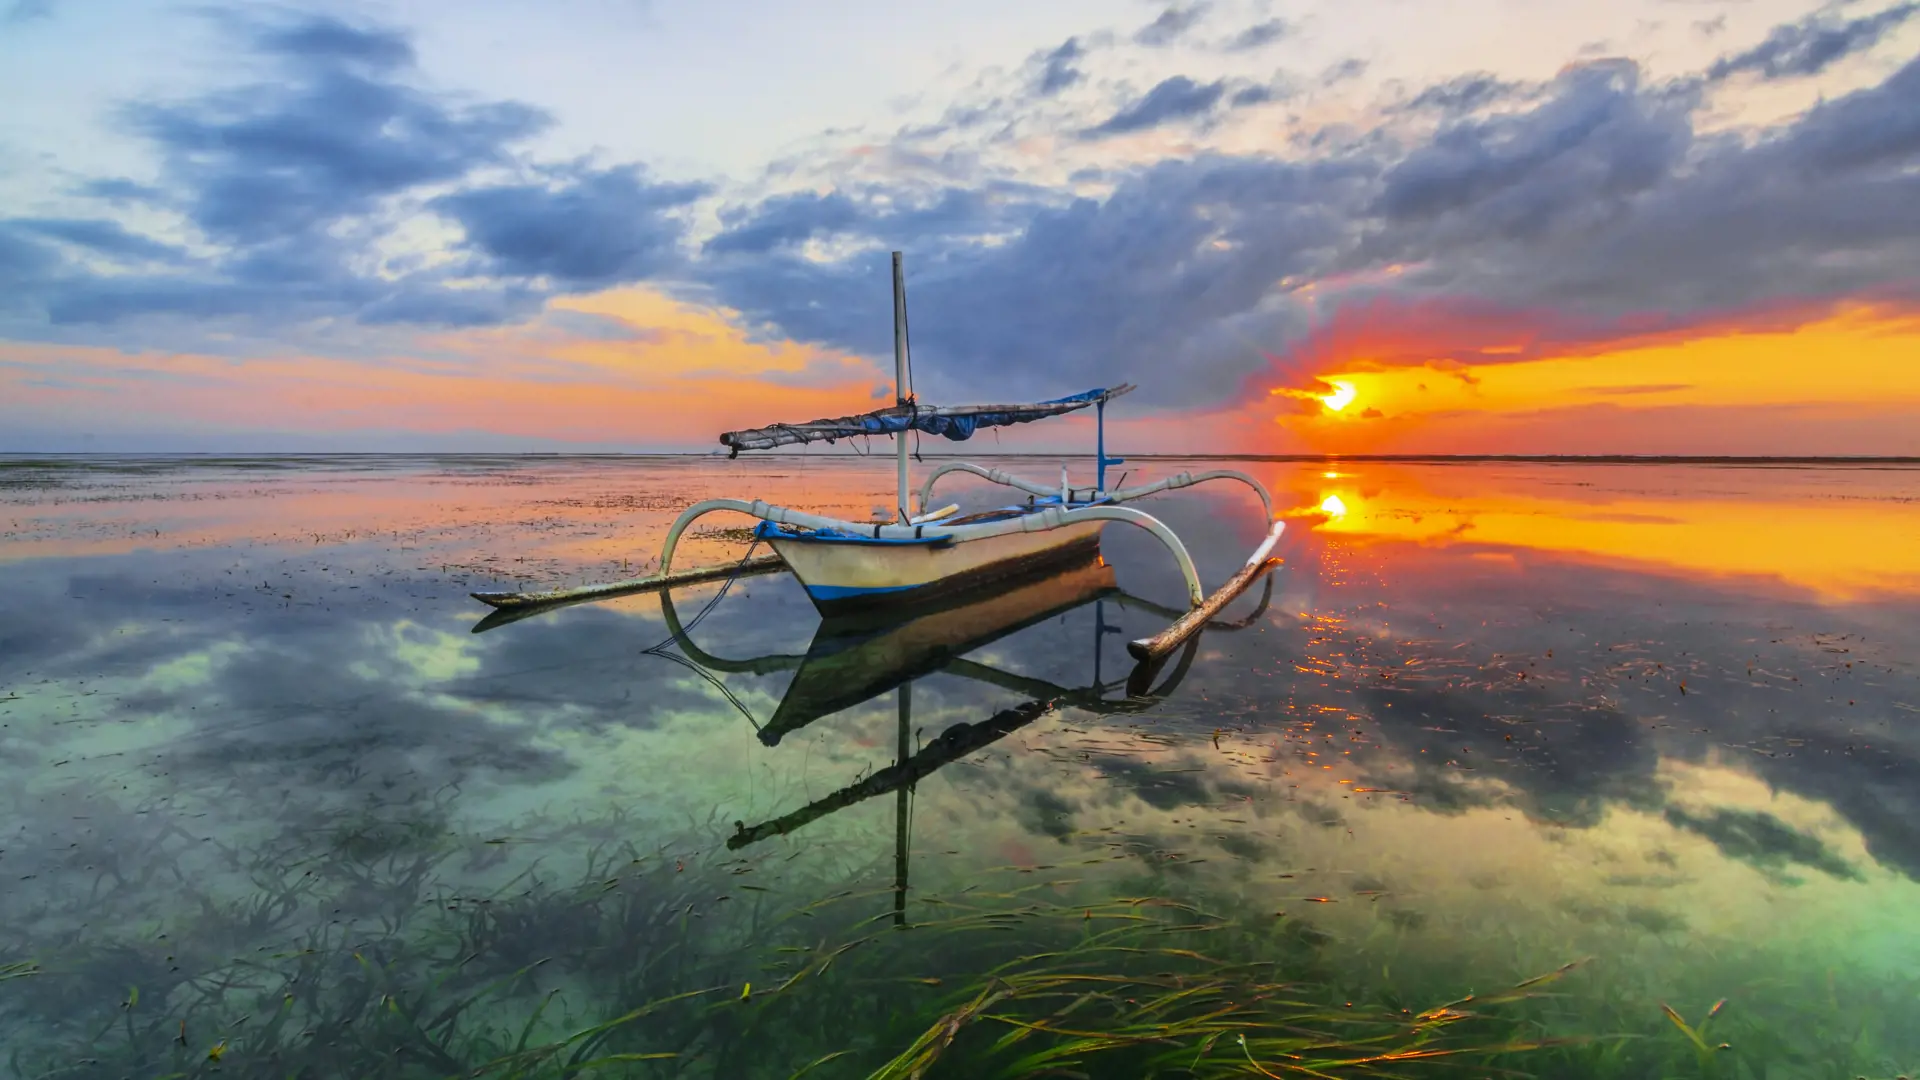 Morning Reflektion At Sanur Beach Island Bali By Making Jukung A Point Of Interest